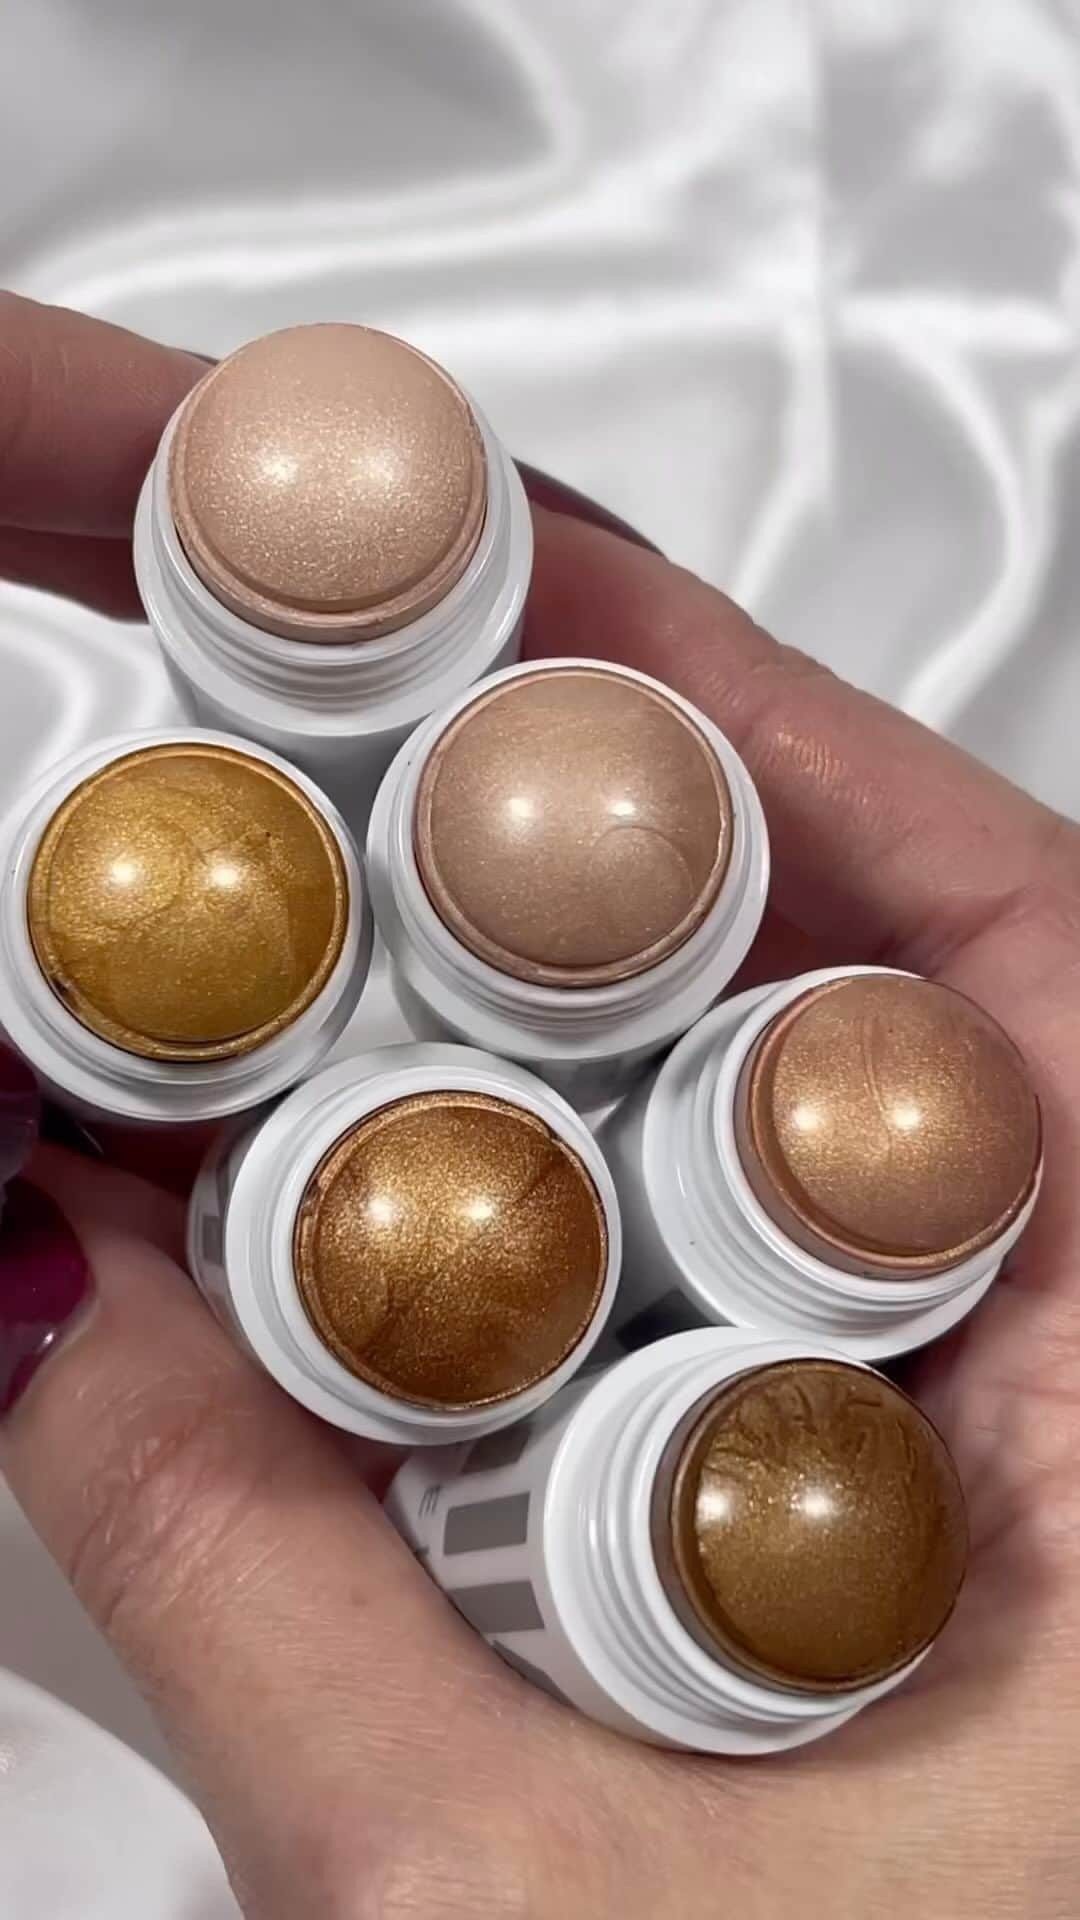 Milk Makeupのインスタグラム：「In our cream highlighter era ✨If you're looking for a gift that sparkles (and doesn't break the budget 🫠), our Highlighter sticks come in 6 radiant shades AND has over 1000+ swipes per stick... just saying 🖤 Available @sephora & MilkMakeup.com.   🎥: @thebeautyradar #highlighter #giftideas」